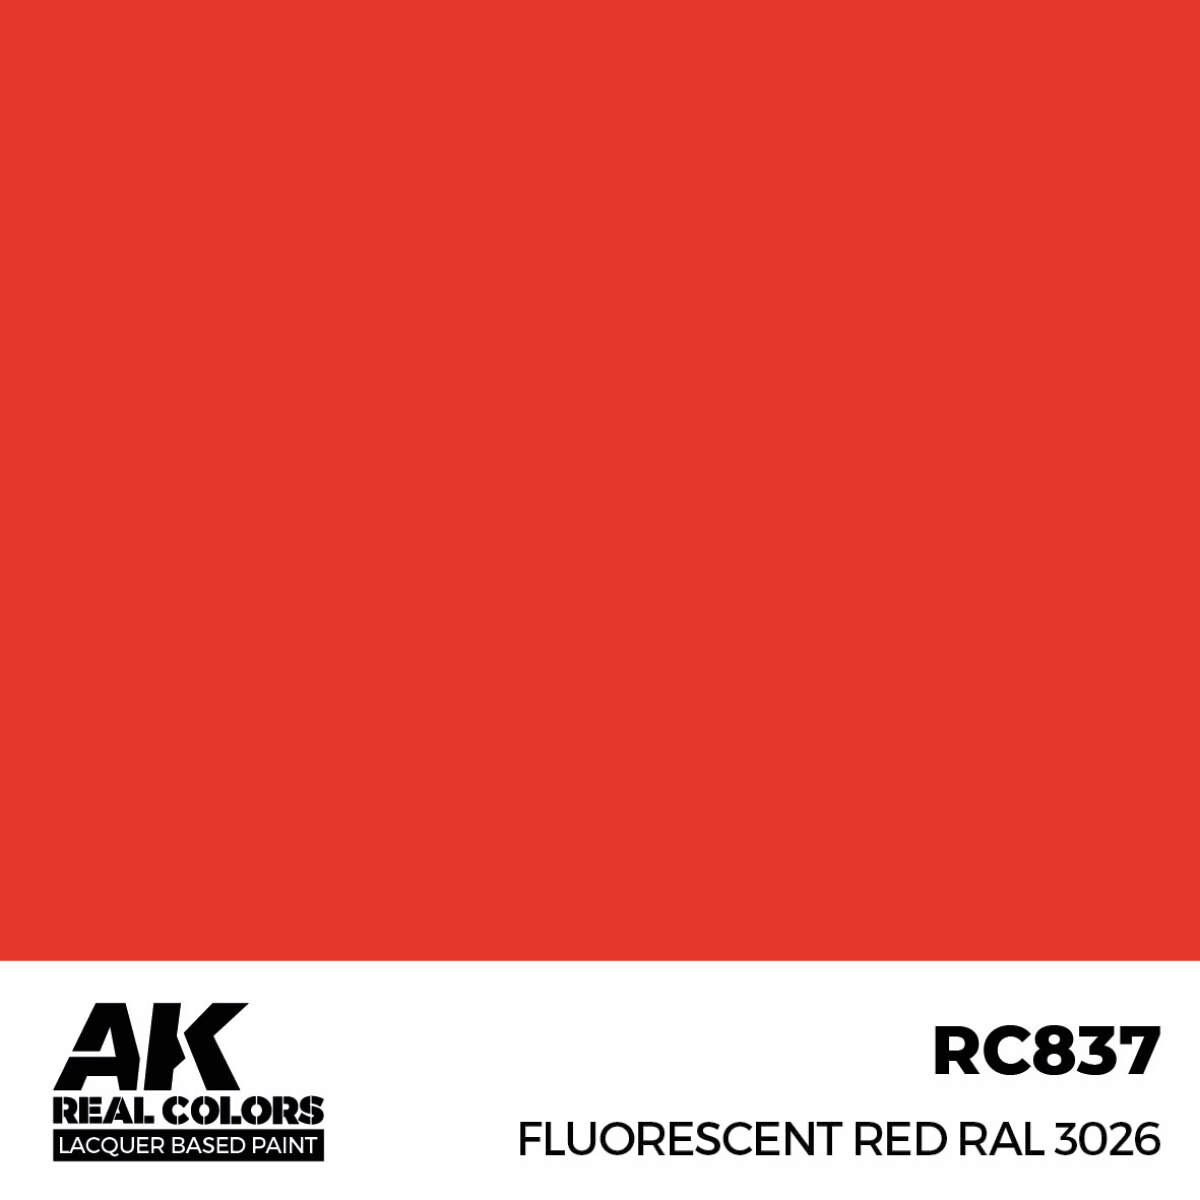 AK RC837 Real Colors Fluorescent Red RAL 3026 17 ml.